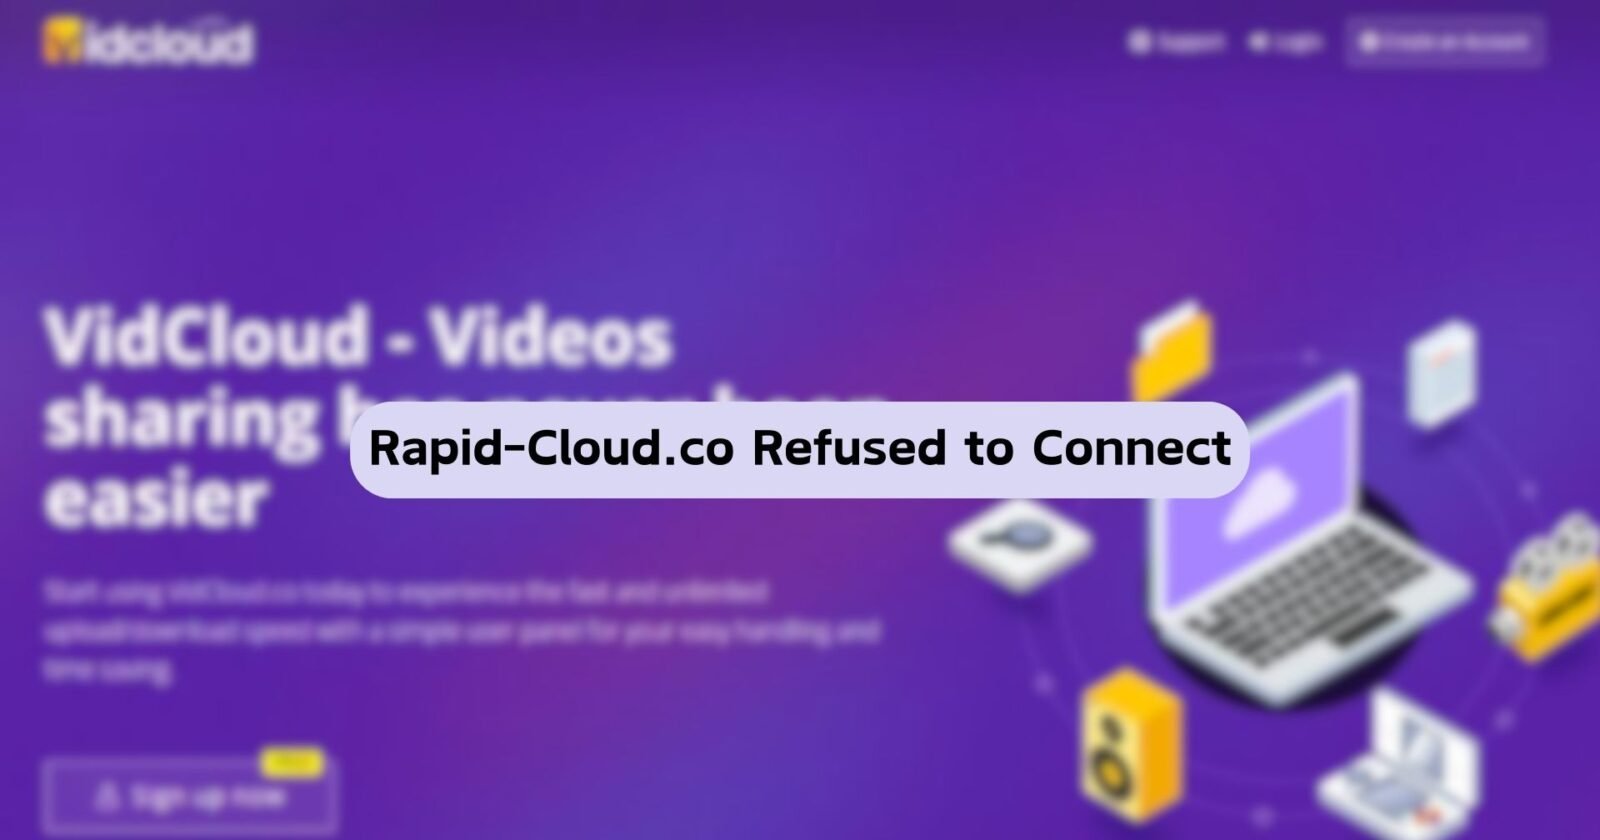 Rapid-Cloud.co Refused to Connect